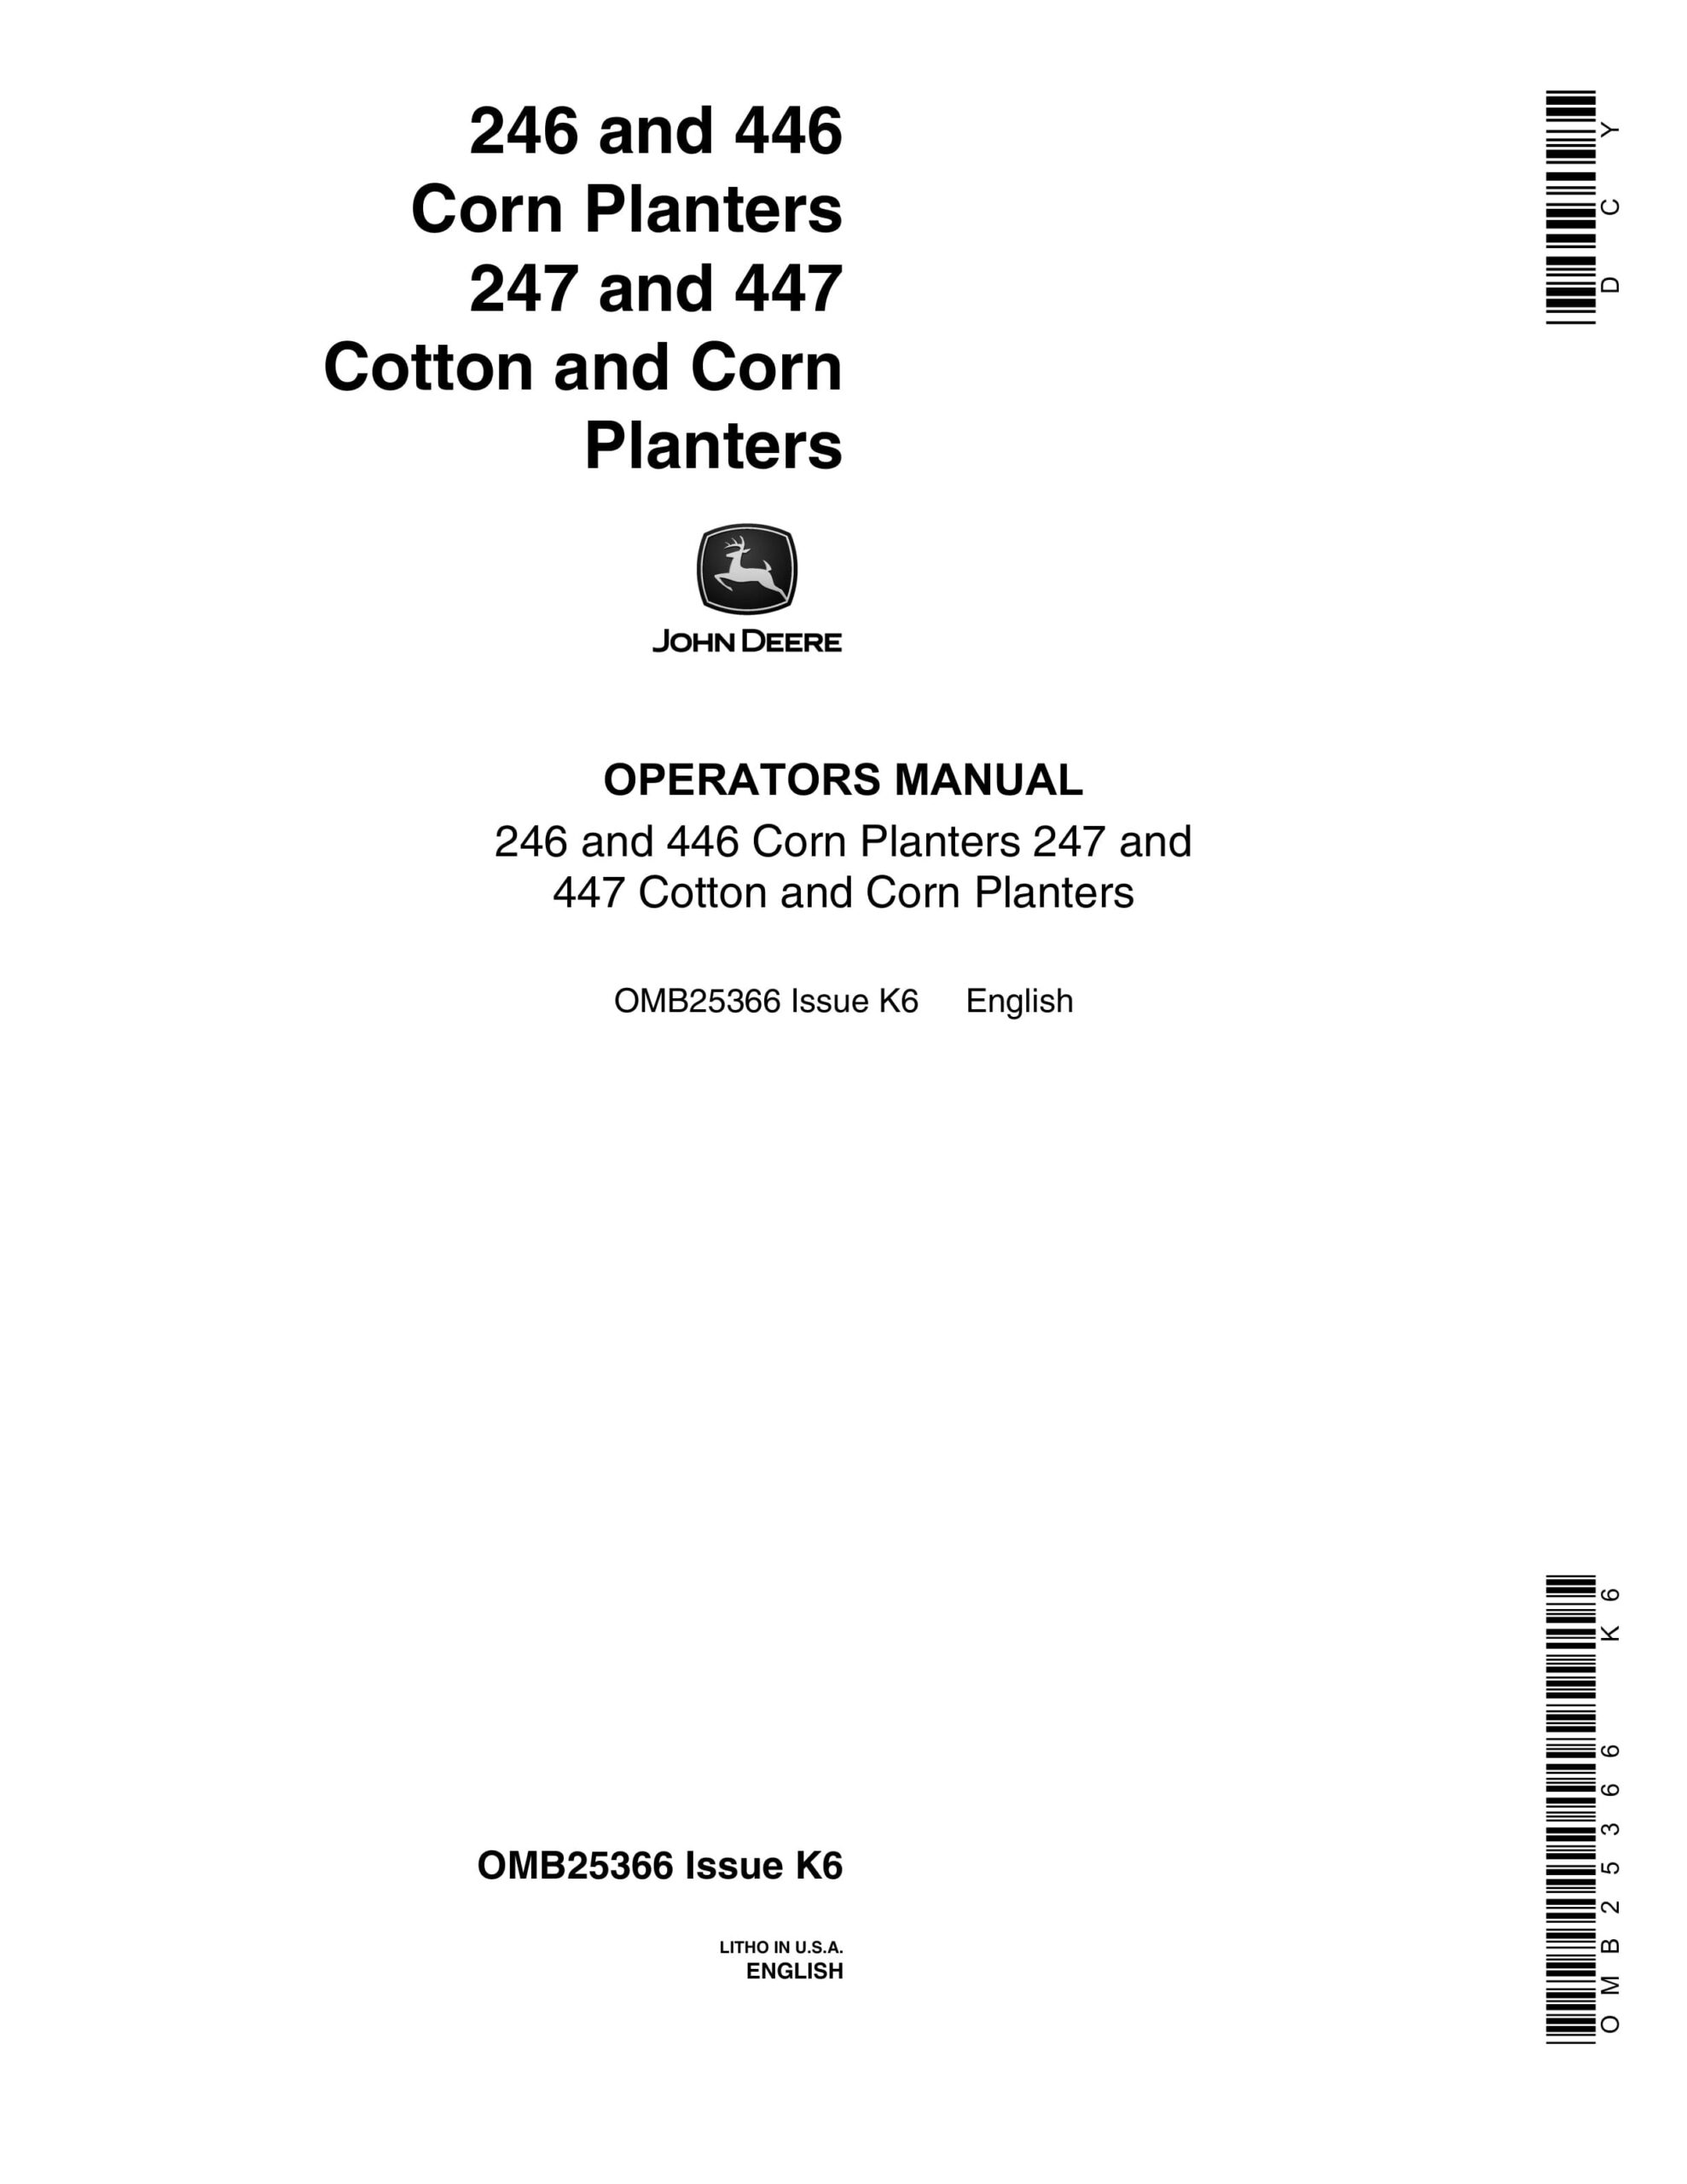 John Deere 246 and 446 Corn Planter 247 and 447 Cotton and Corn Planter Operator Manual OMB25366-1